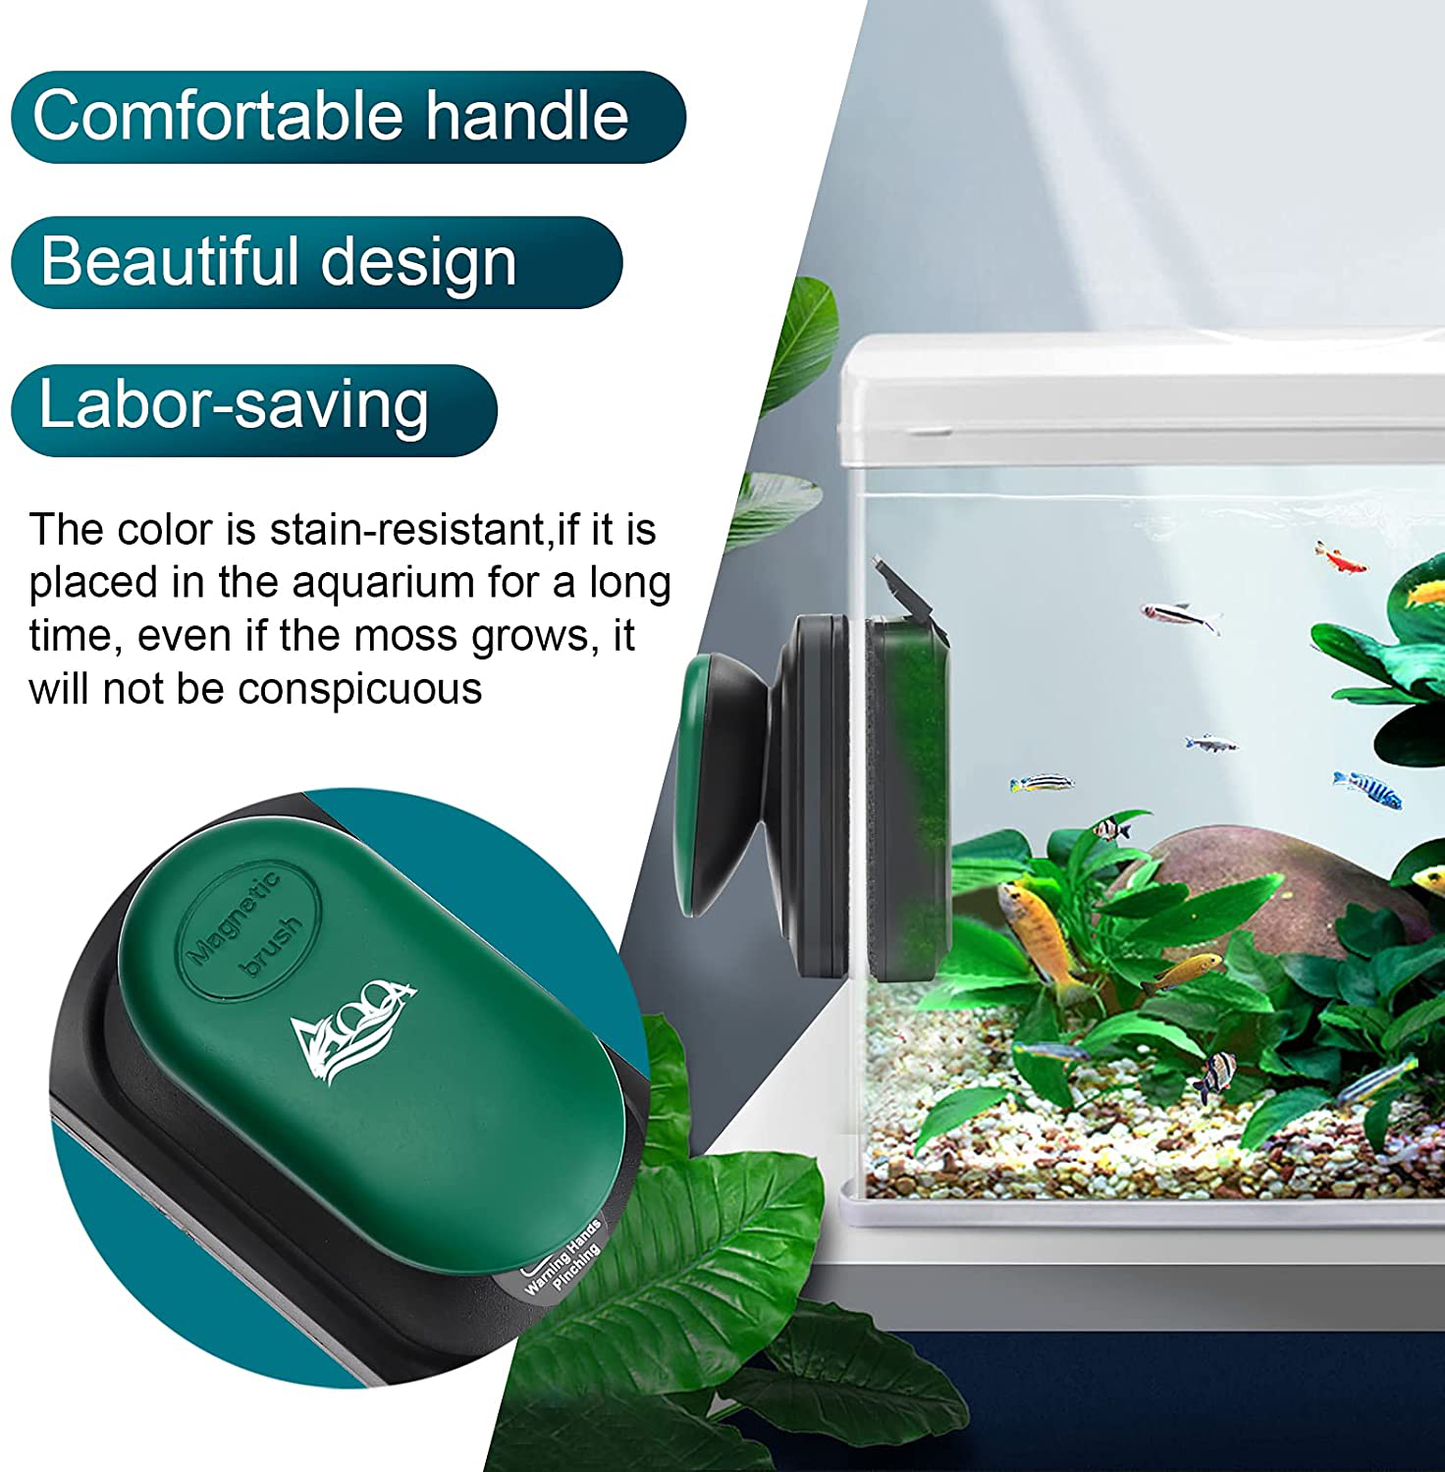 AQQA Magnetic Aquarium Cleaner Brush,Fish Tank Algae Cleaner Tool,Floating with Handle Scratch-Free,2 Kinds Scraper Suitable Glass and Acrylic Tank